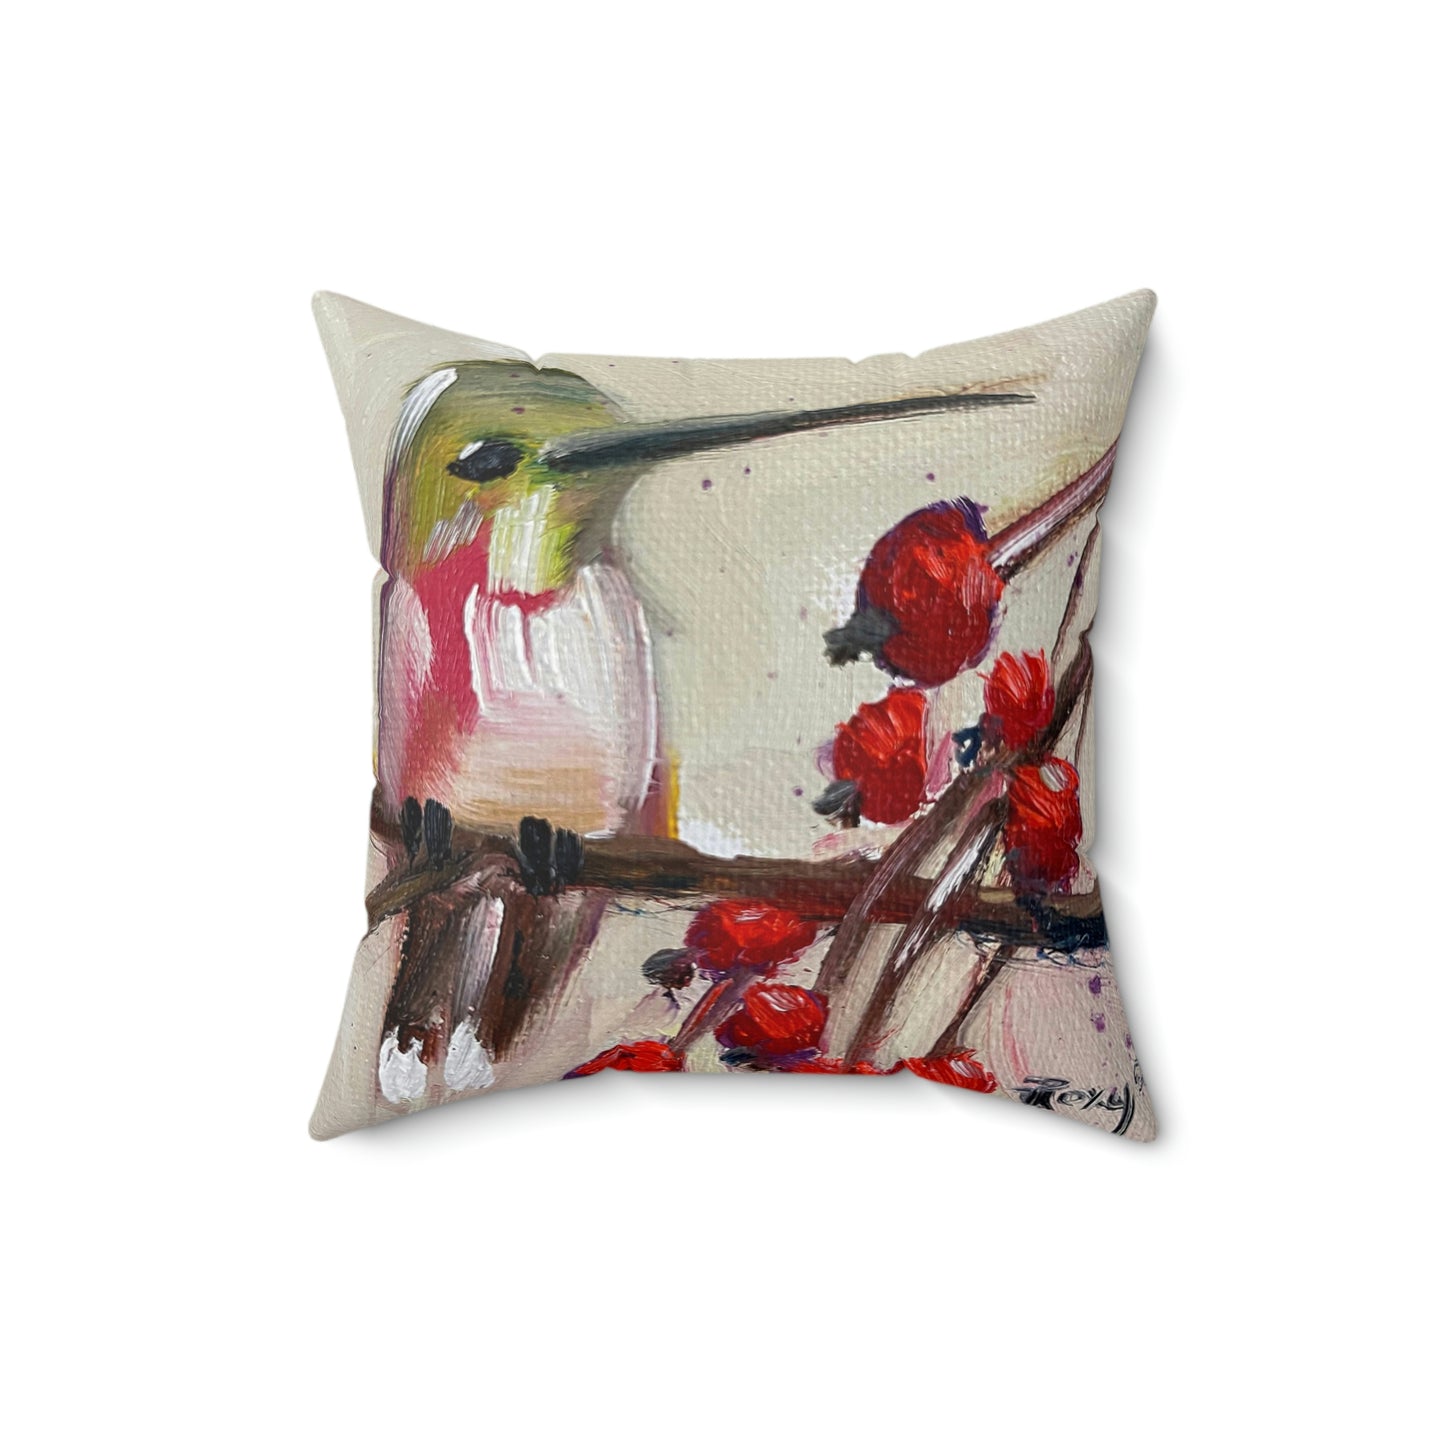 Hummingbird with Berries Indoor Spun Polyester Square Pillow